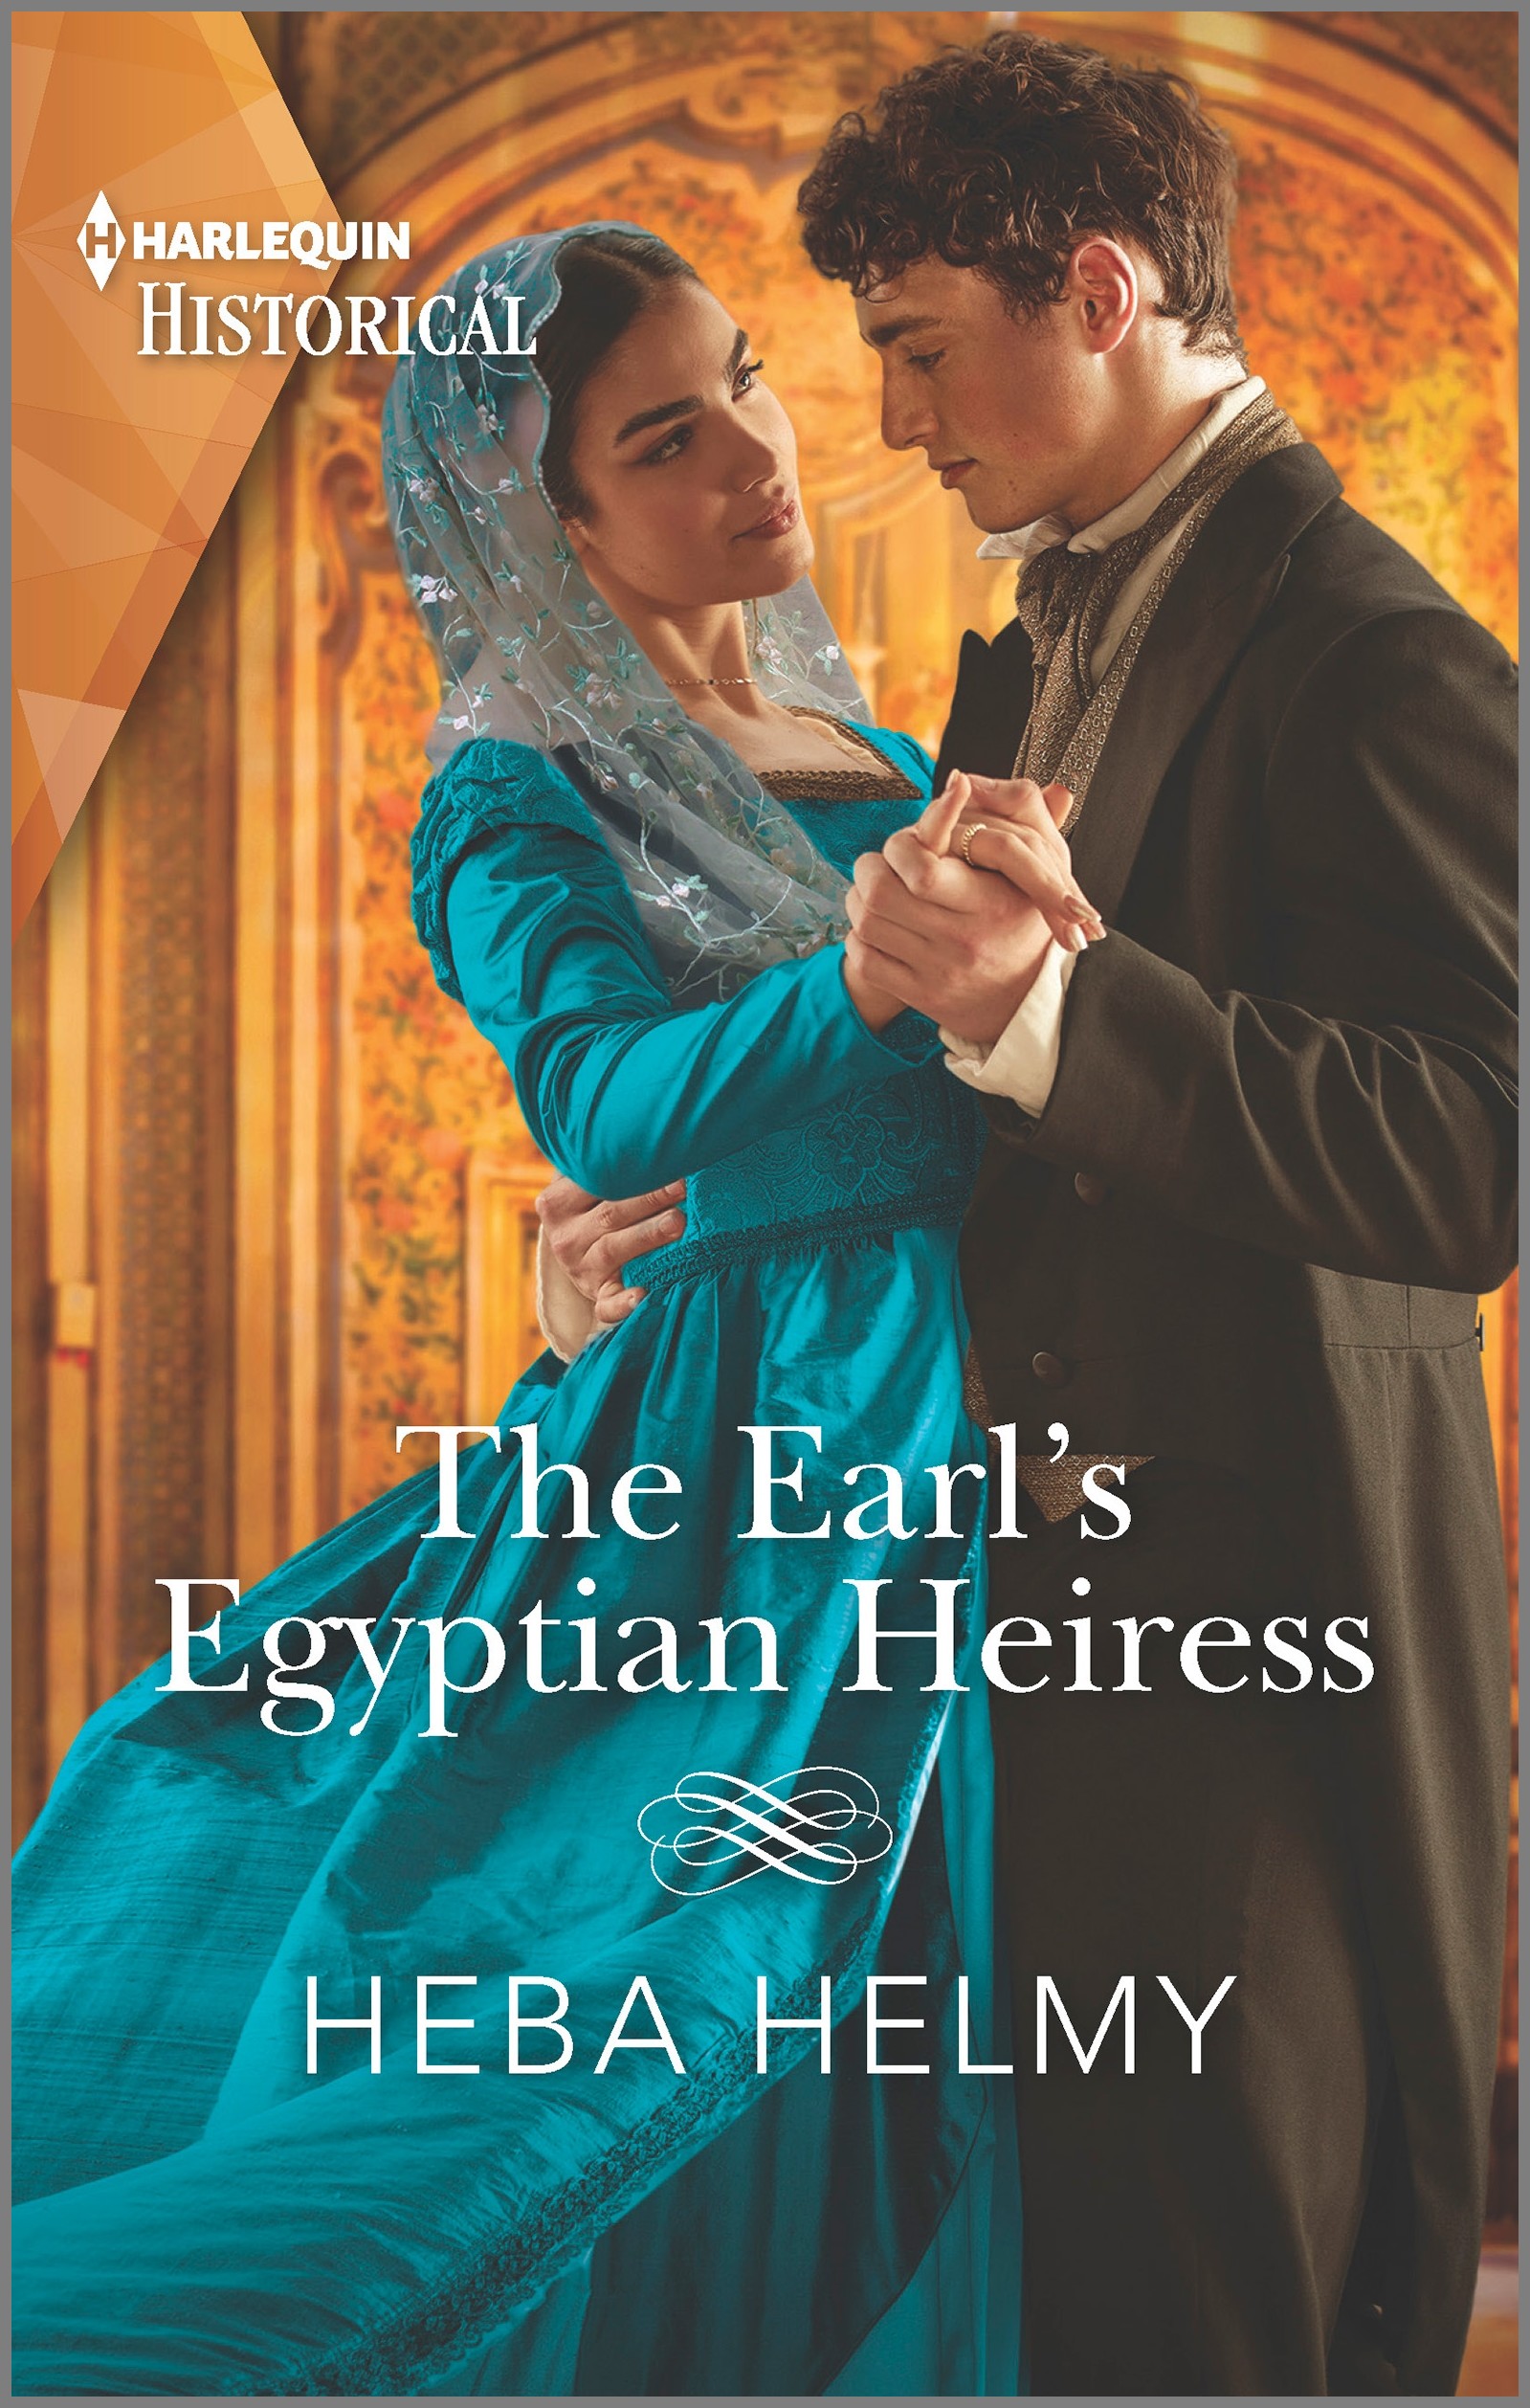 Cover image for THE EARL'S EGYPTIAN HEIRESS by Heba Helmy, featuring a man and a woman dancing. They are wearing Victorian clothing. 